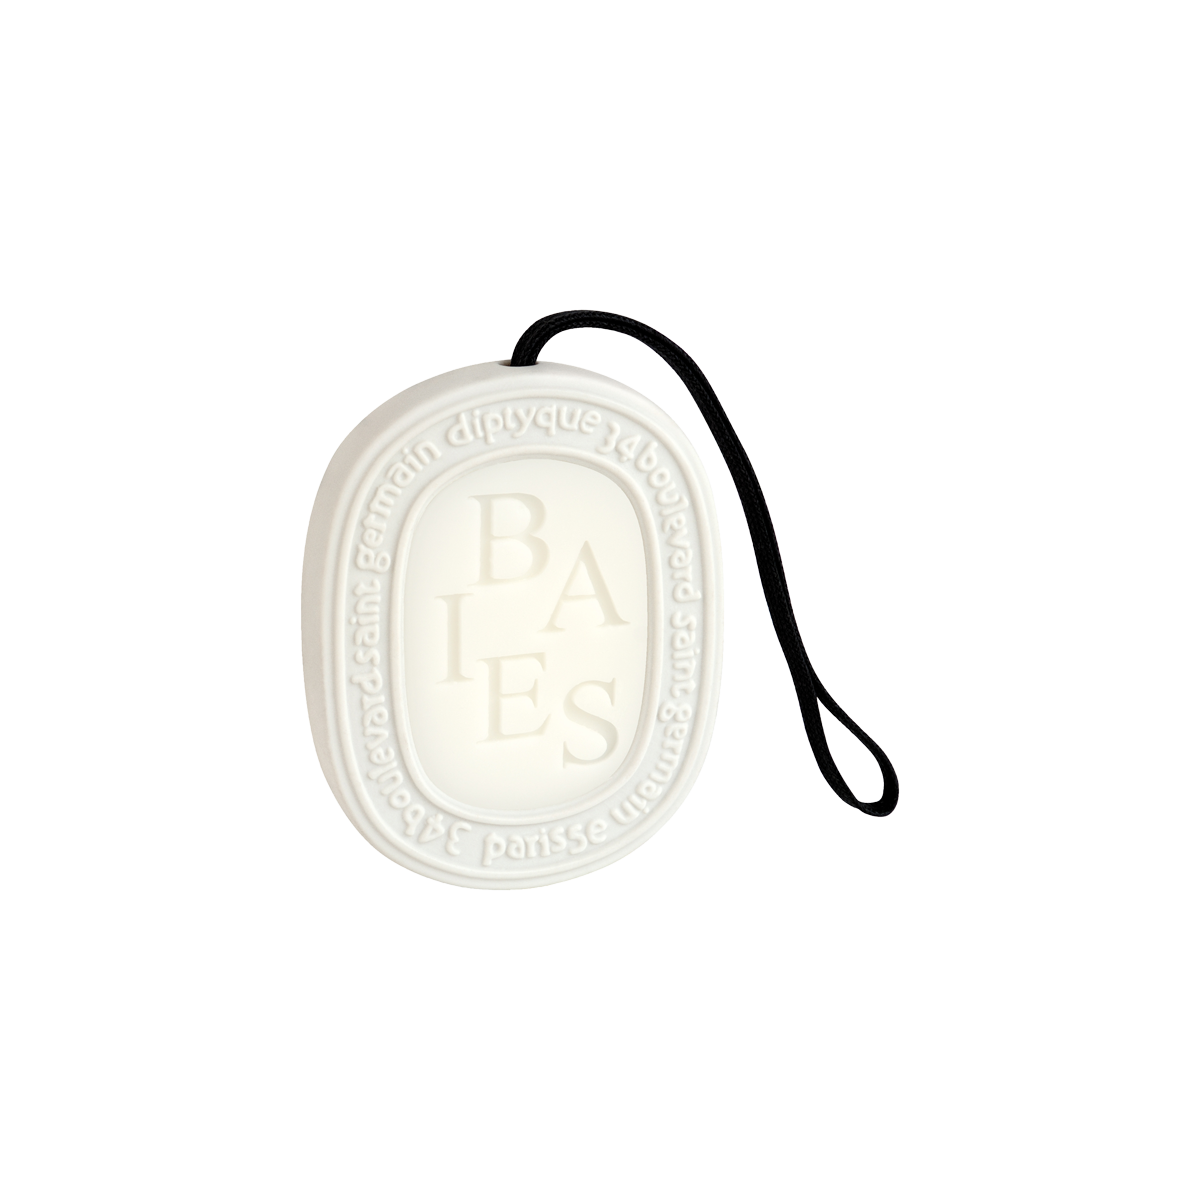 Diptyque - Baies Scented Oval